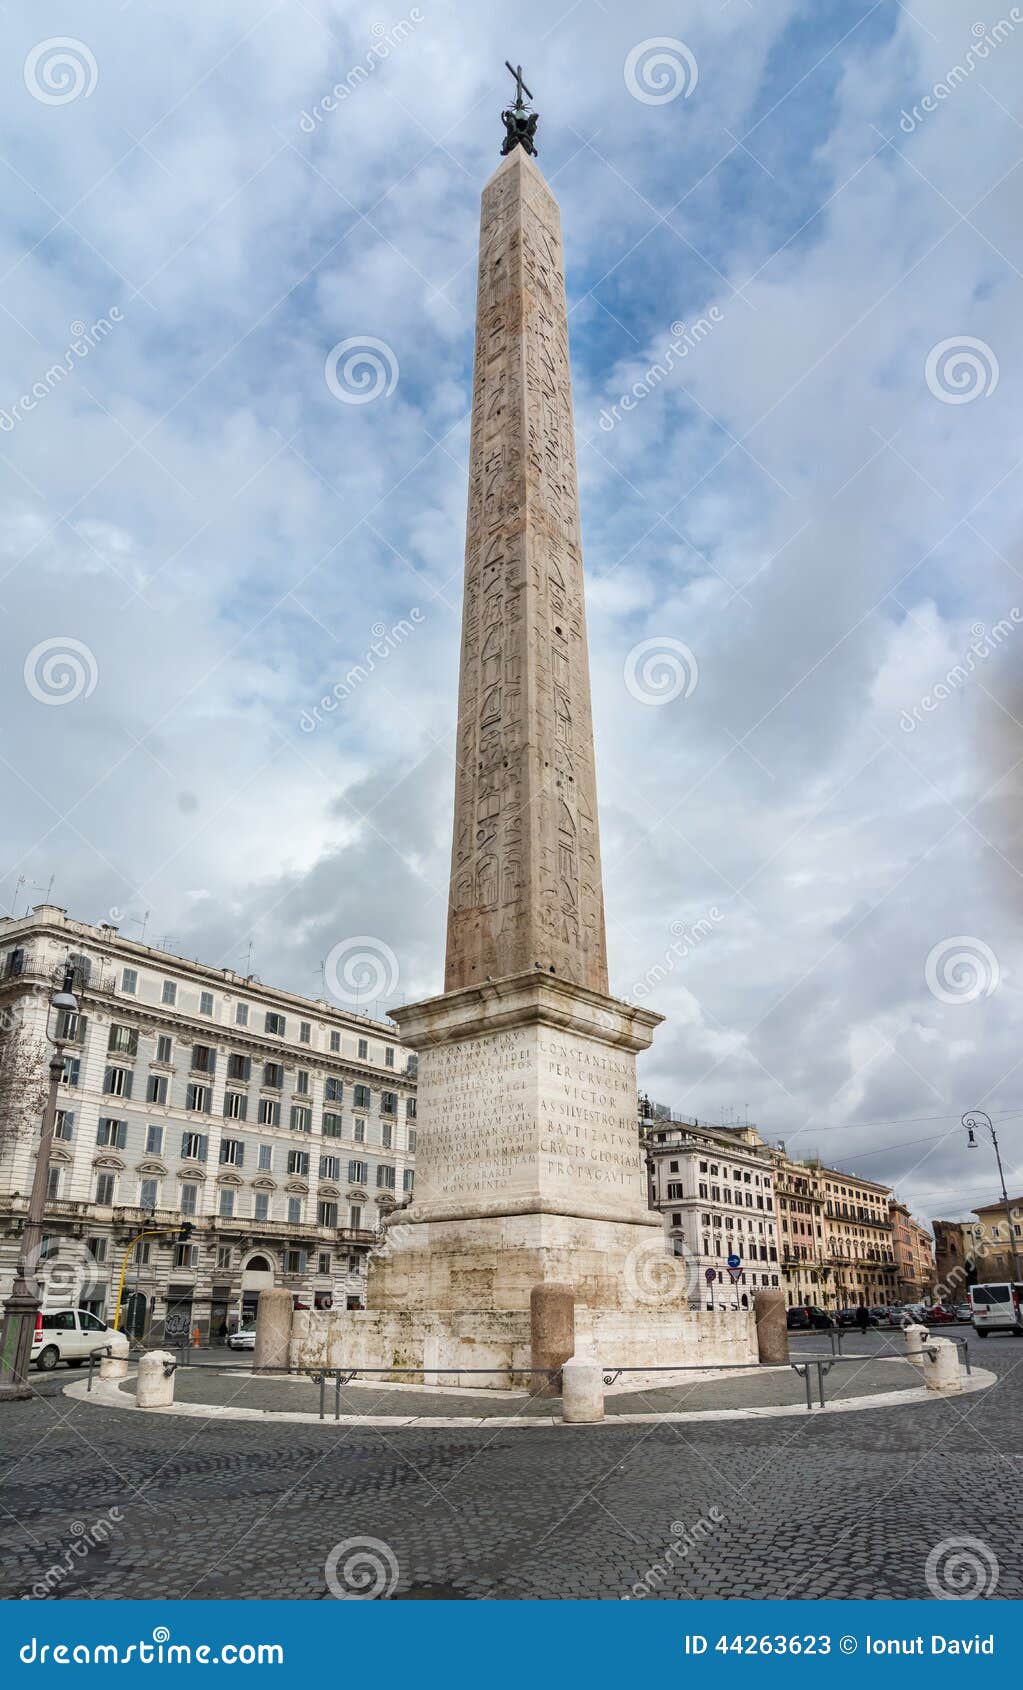 the egyptian obelisk in piazza san giovanni